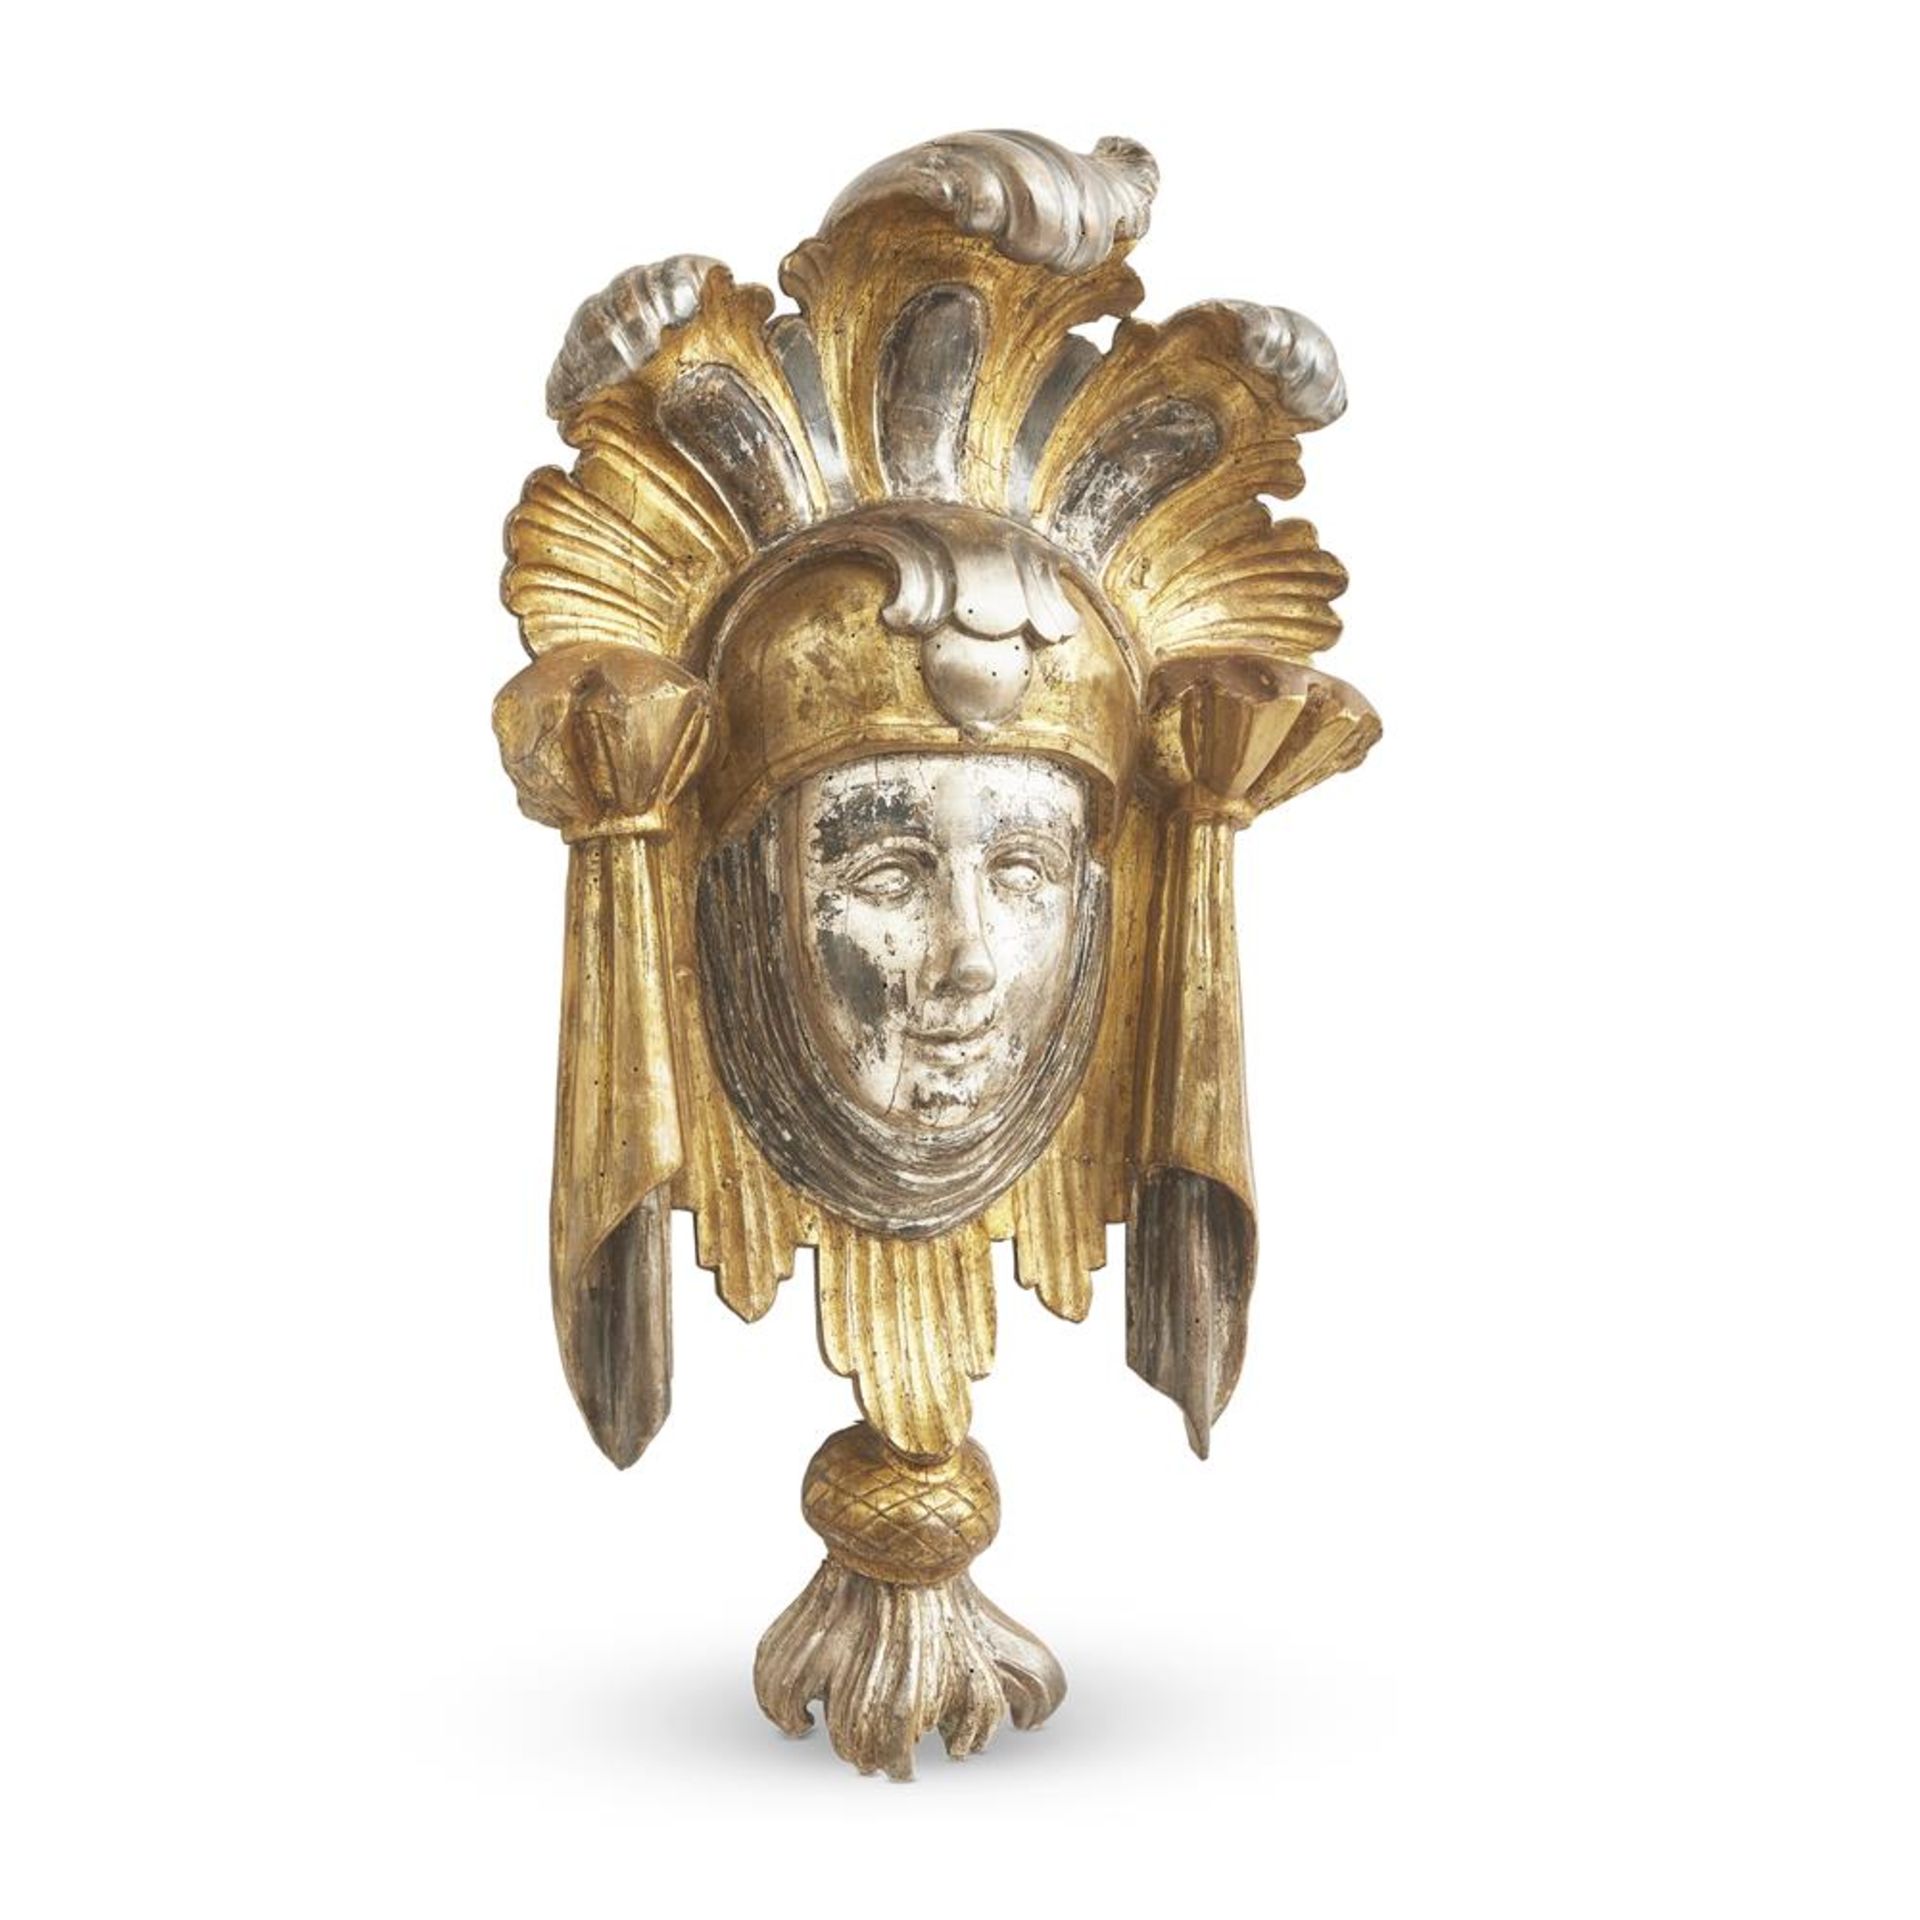 A VENETIAN GILT AND SILVERED CARVED WOODEN THEATRICAL WALL MASK, 18TH CENTURY